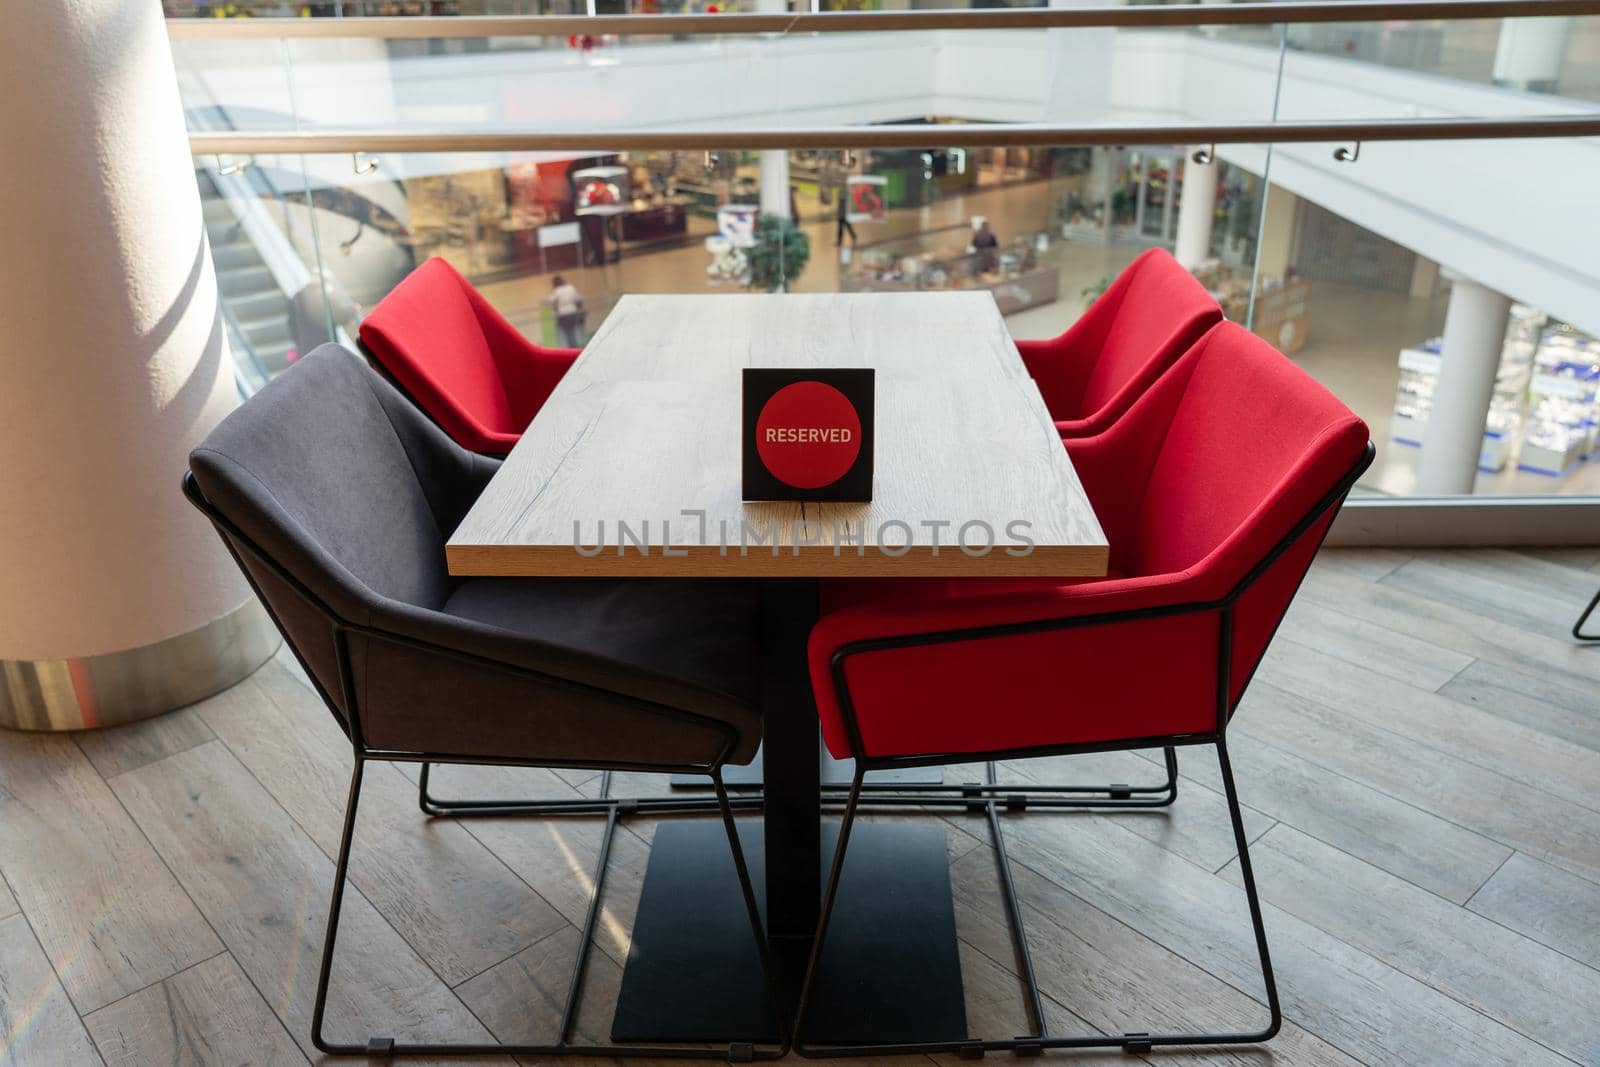 A table and soft chairs for visitors to the food court of a modern shopping center. The table is reserved.